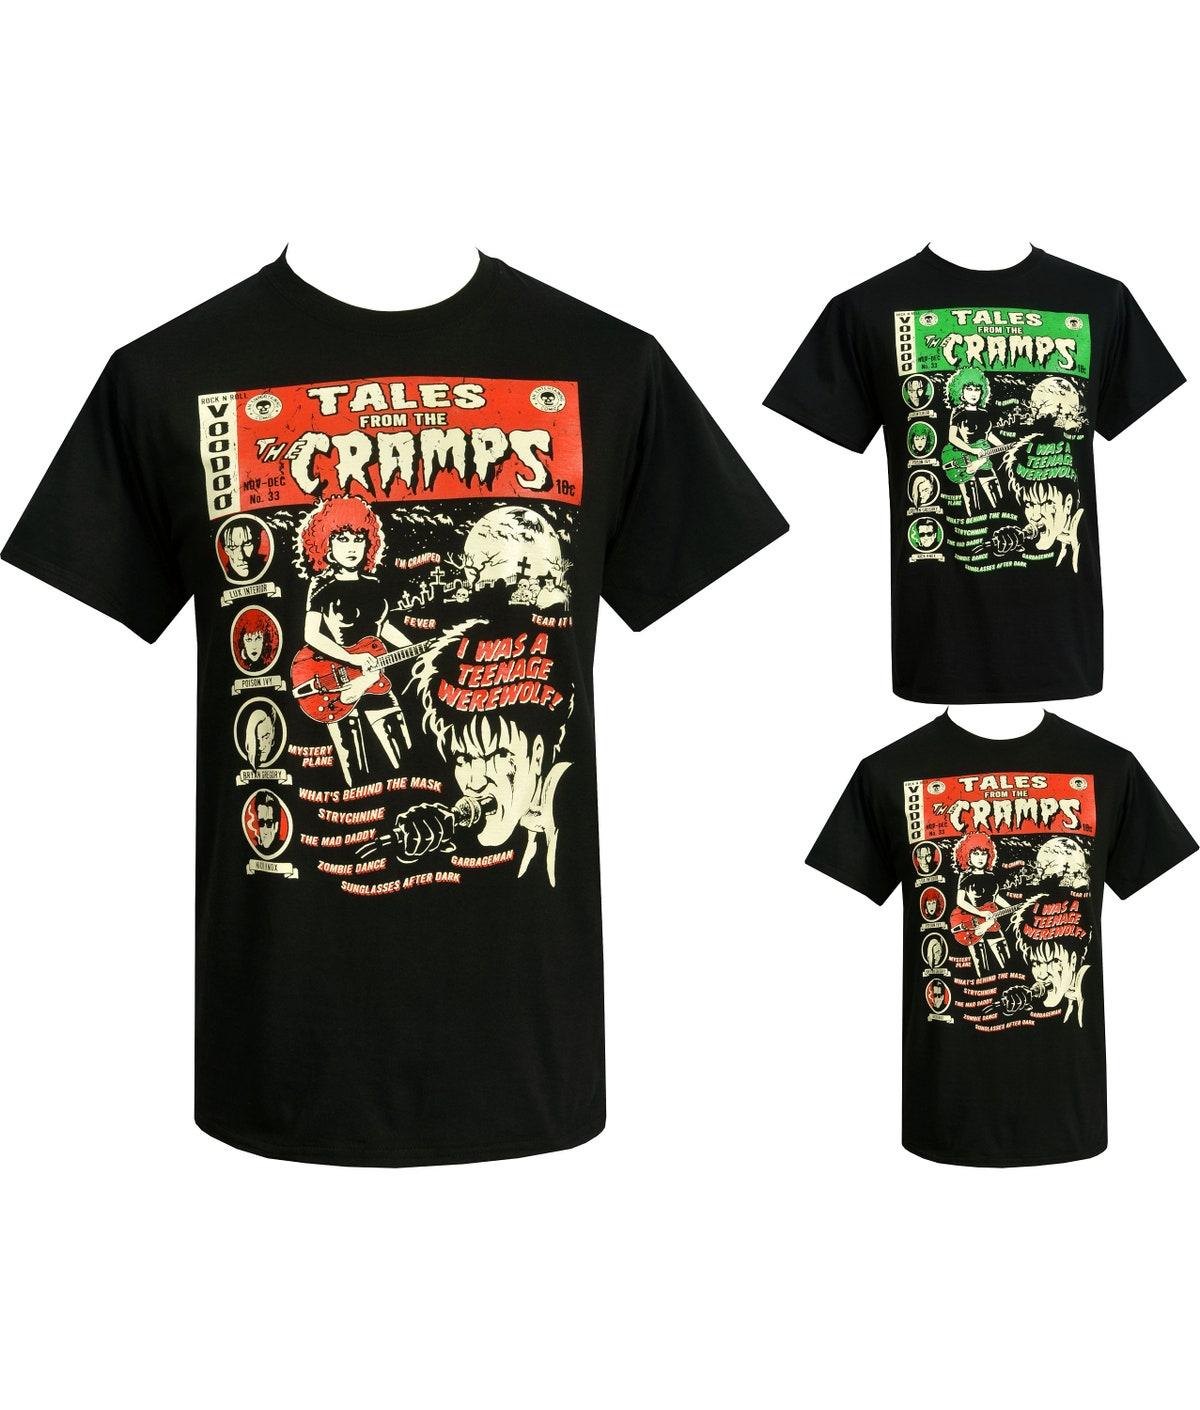 The Cramps Rock ‘n’ Roll Monster Bash Graphic T-shirt For Fans